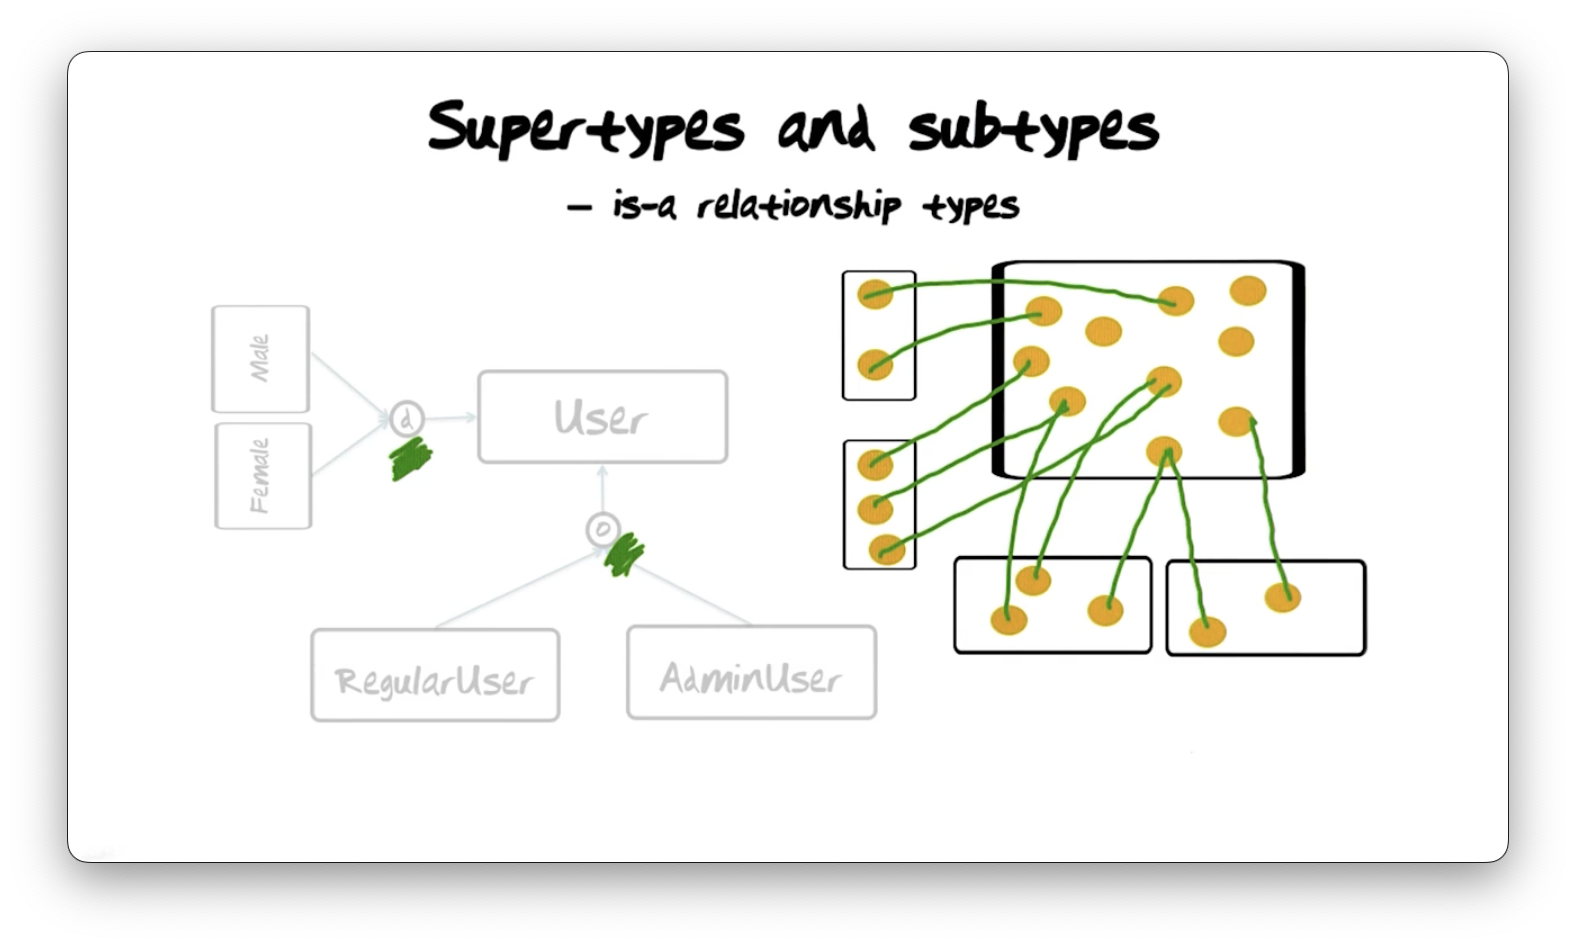 The instances of the subtypes of the user entity
type.